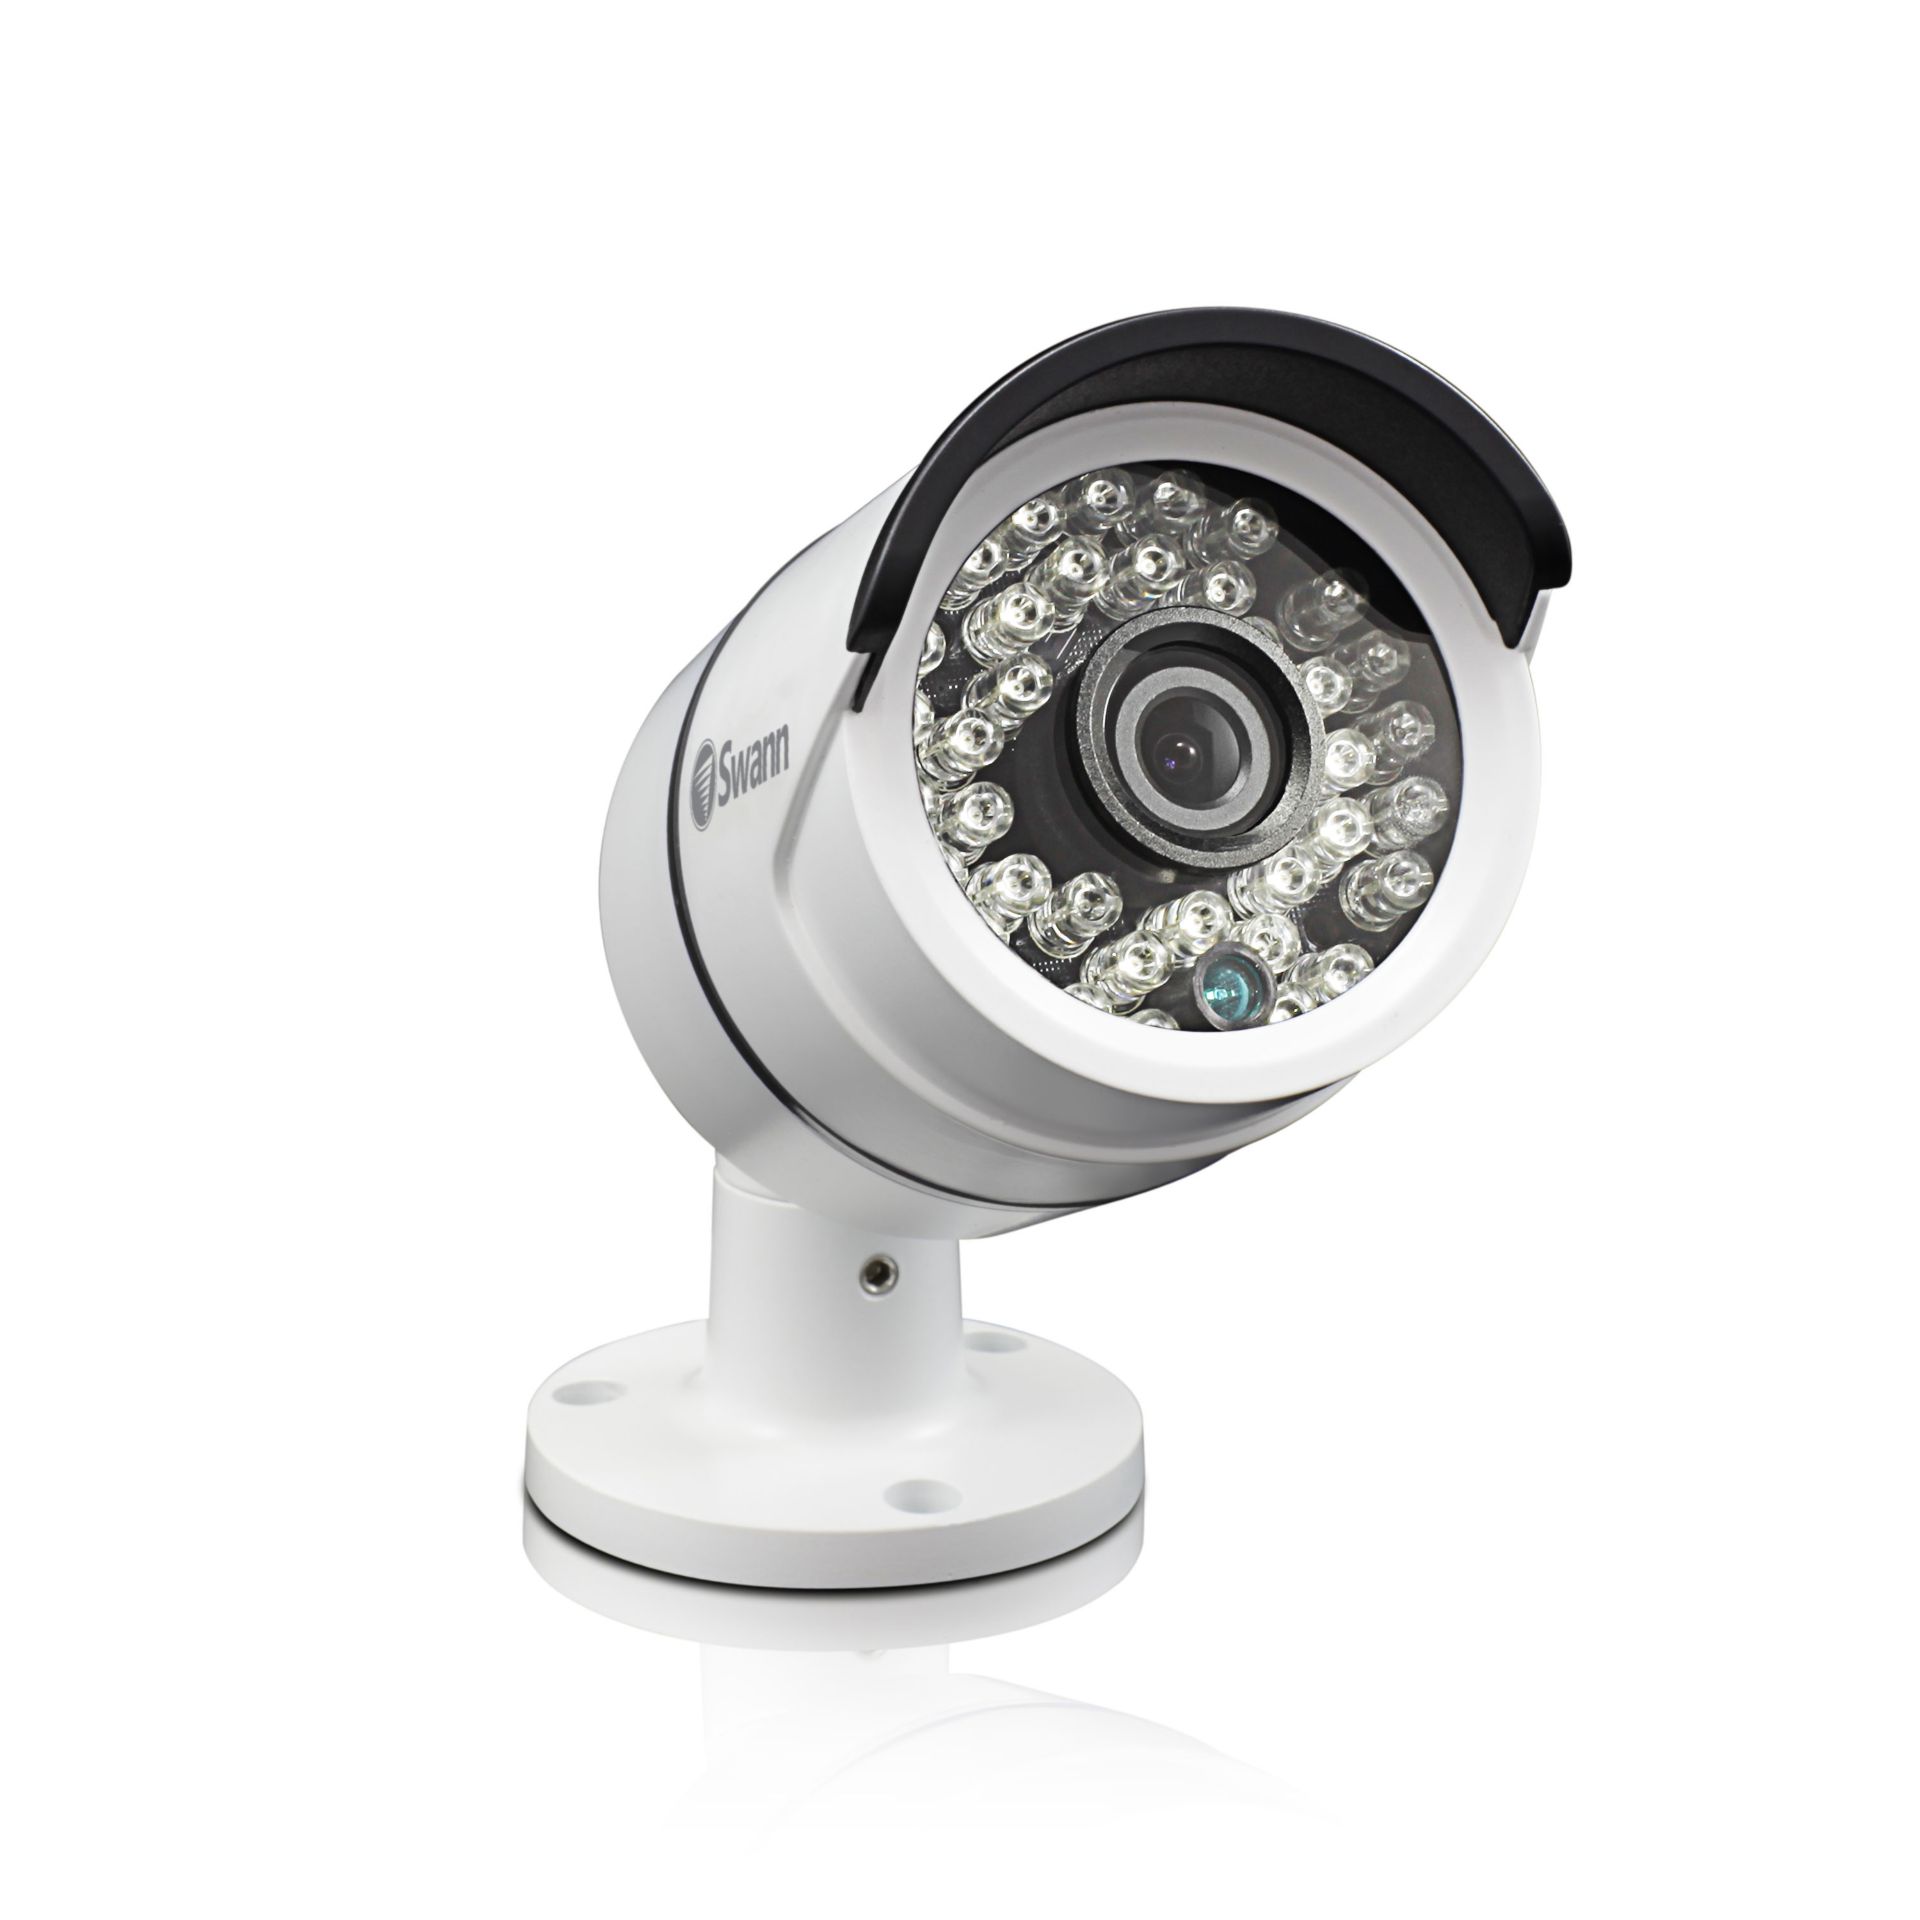 V *TRADE QTY* Grade A Swann Pro H855 Professional Full HD Security Camera - 1080p - 30 Meter Night